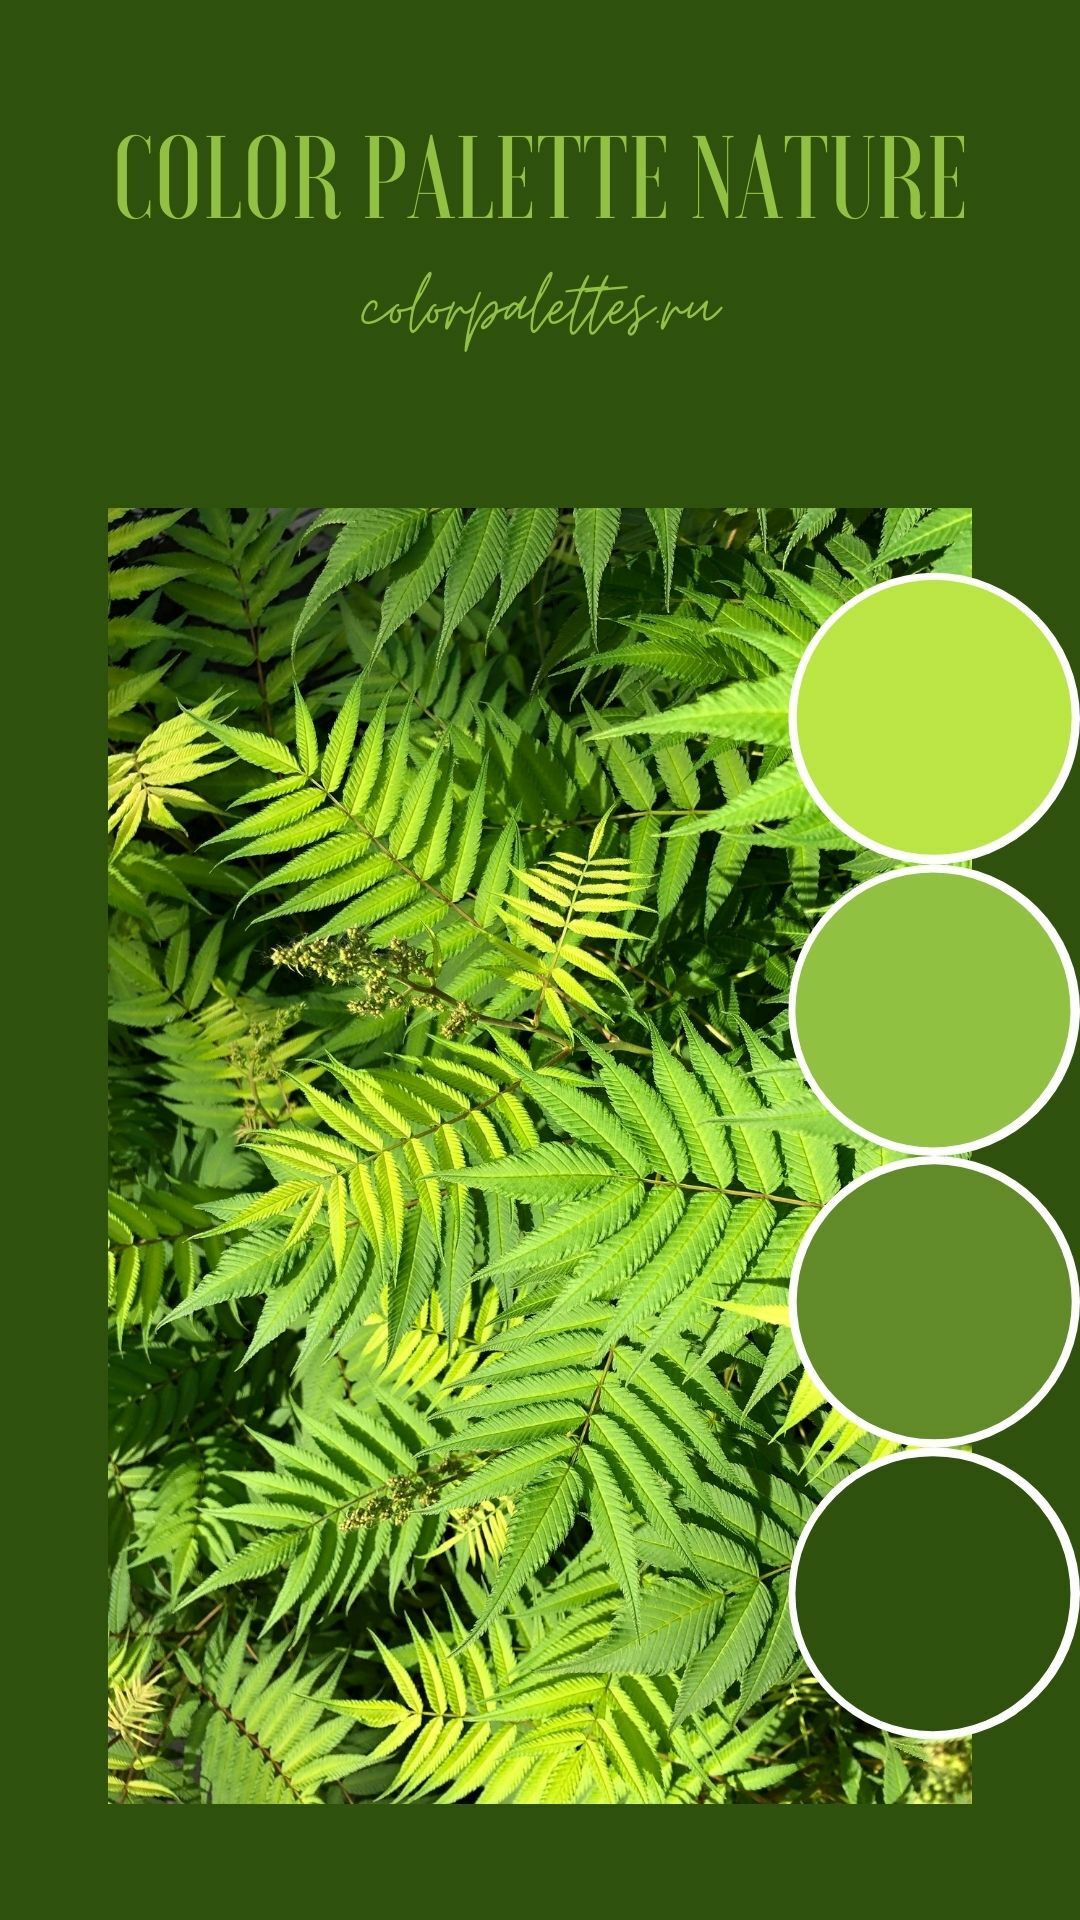 The green color palette of the fern